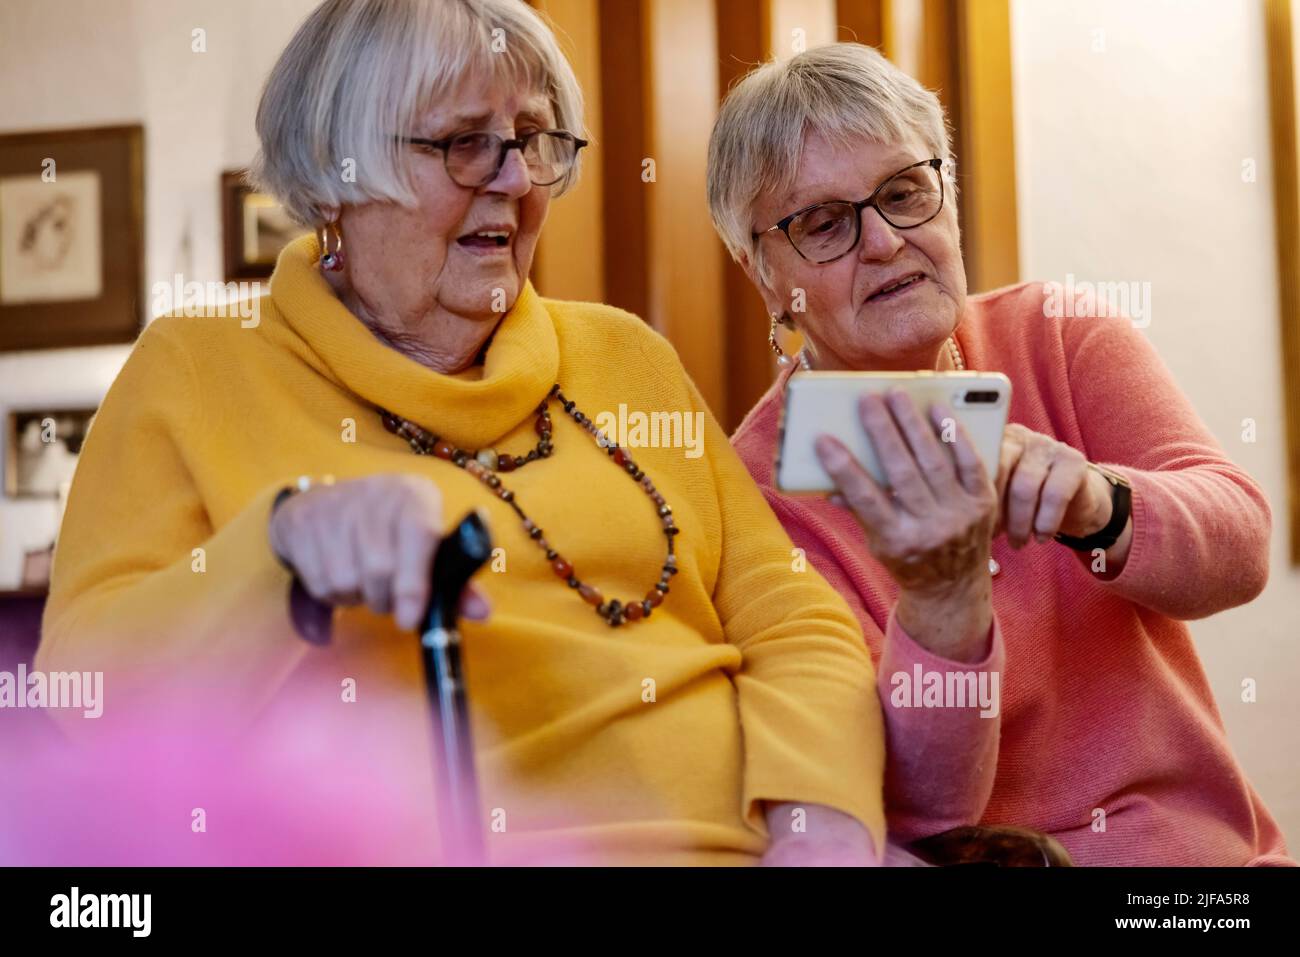 Two senior citizens, sisters, looking at a smartphone at home, Bocholt, North Rhine-Westphalia, Germany Stock Photo